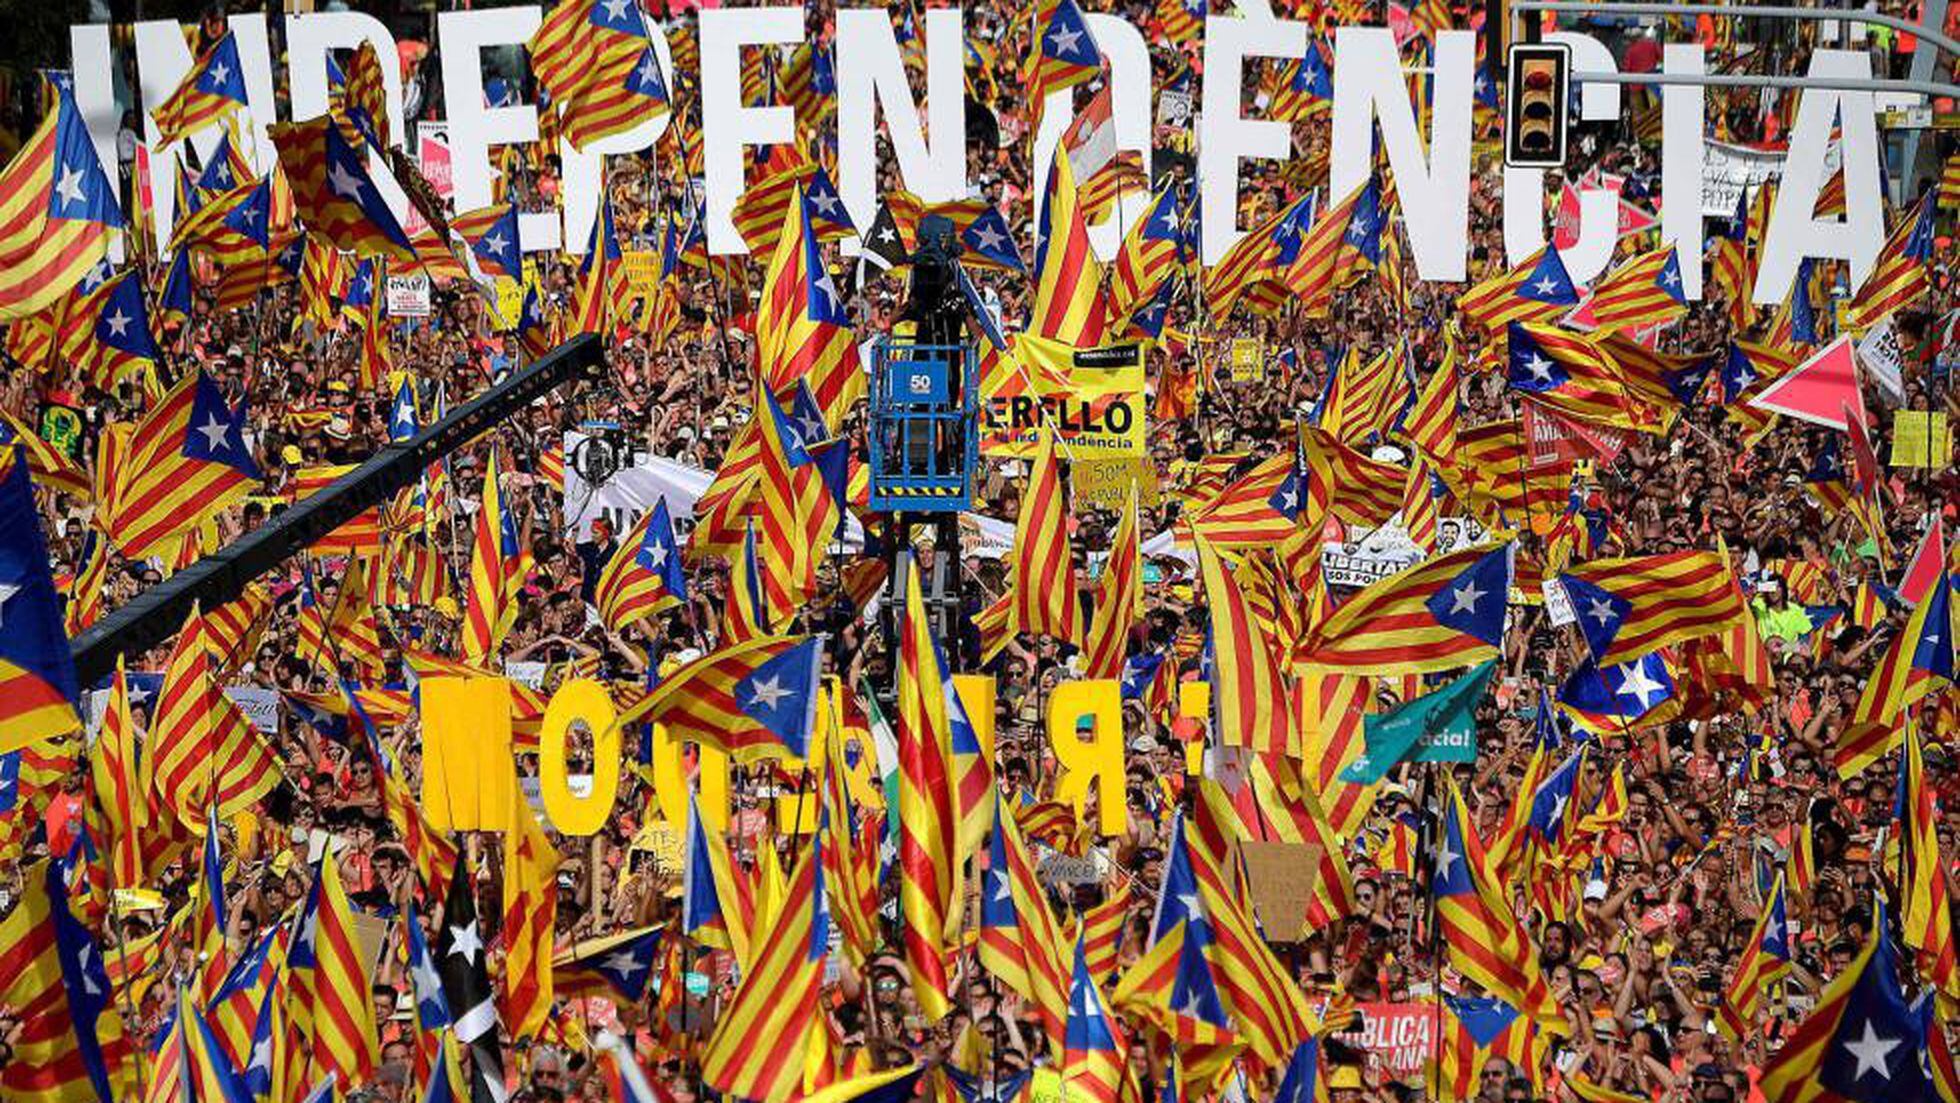 Catalonia vs Spain - independence and sovereignty of Catalan nation is  separated and secuded from Spanish ountry. Vector illustration Stock Photo  - Alamy